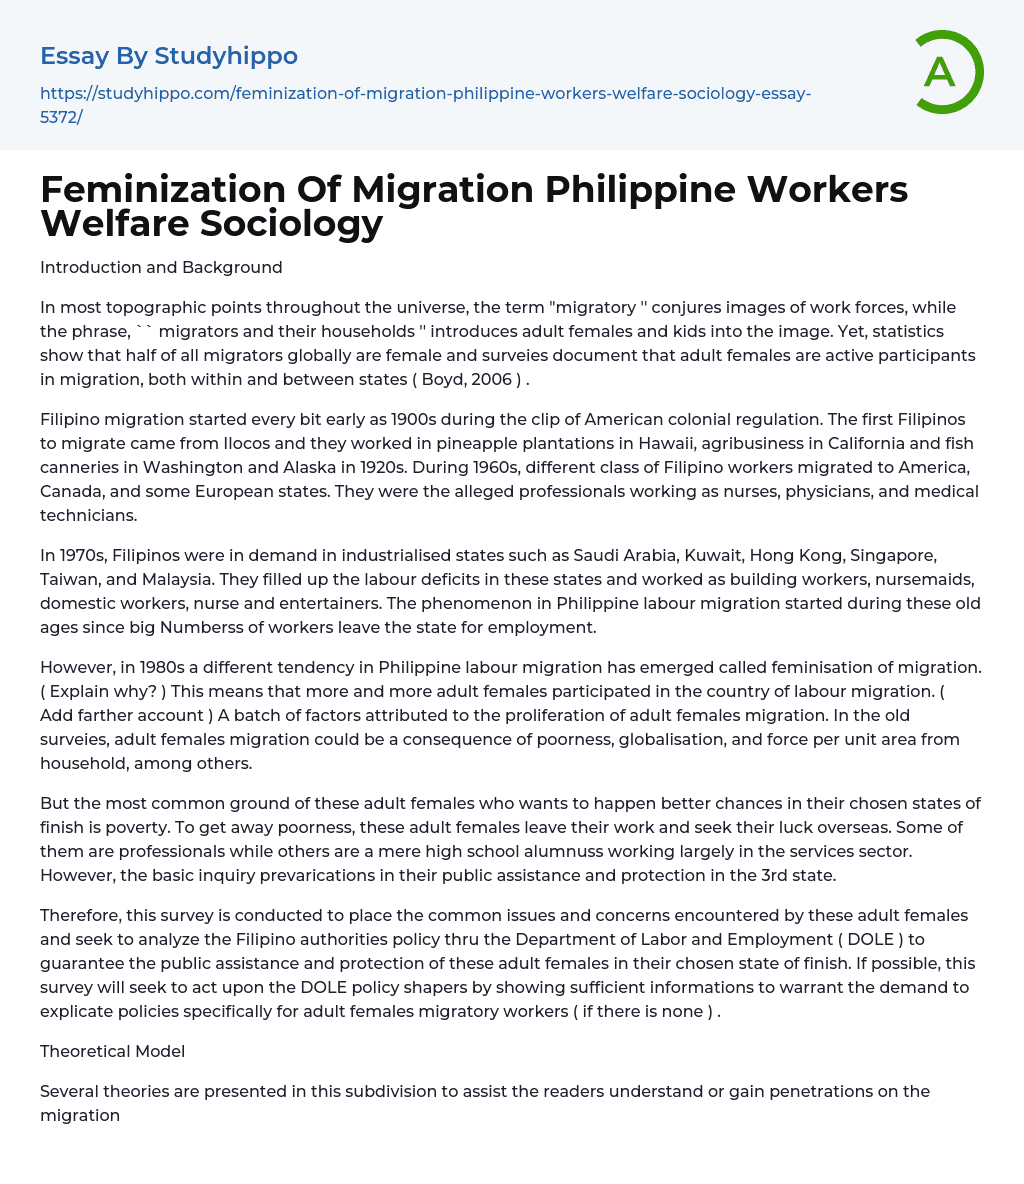 Feminization Of Migration Philippine Workers Welfare Sociology Essay Example